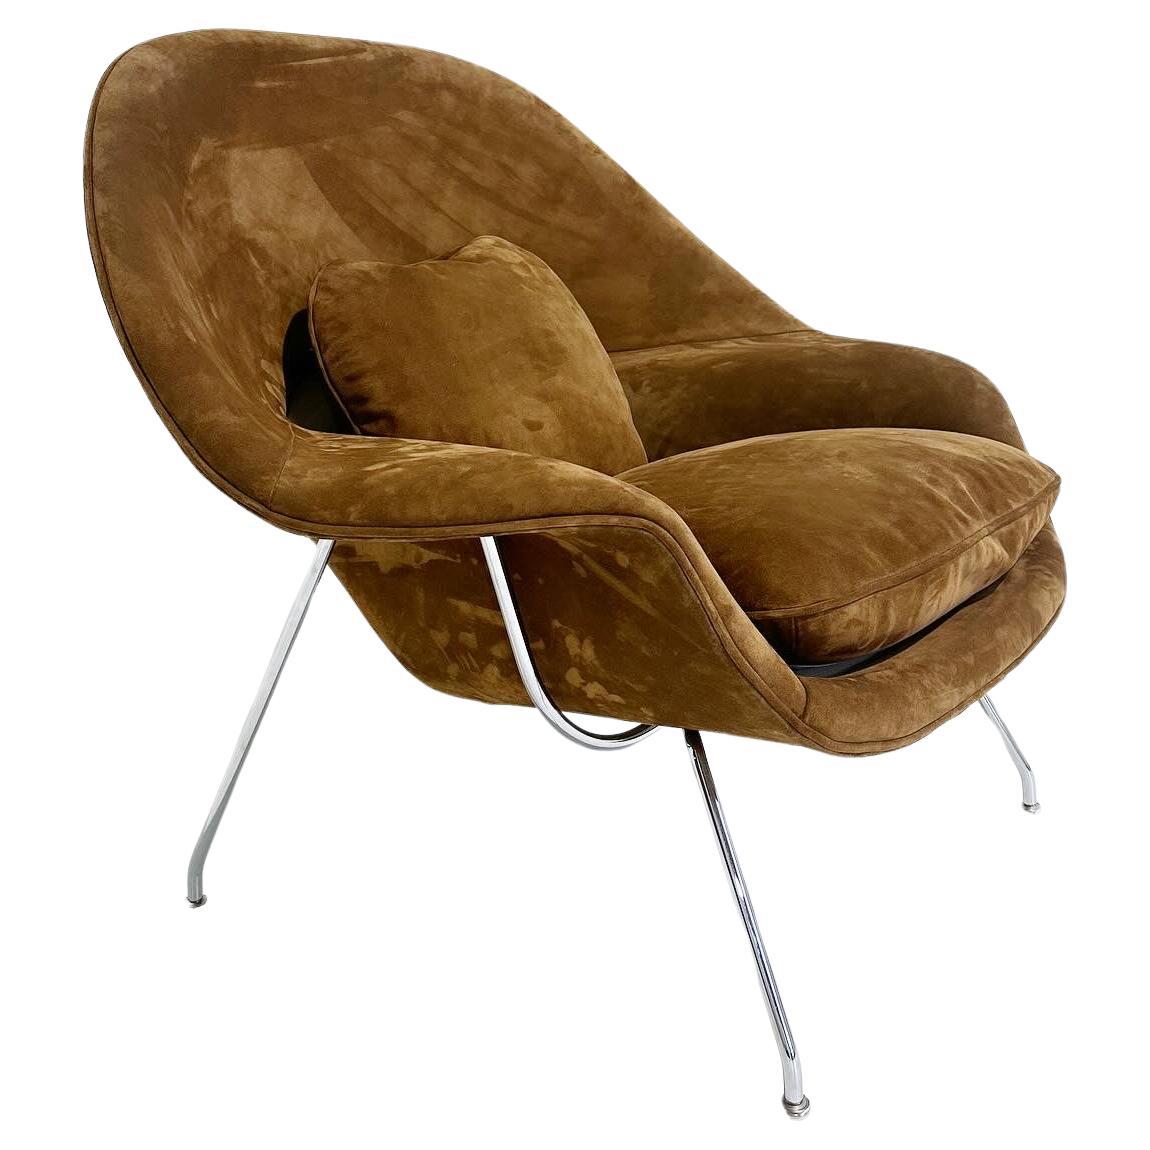 What did Florence Knoll call the Womb chair?